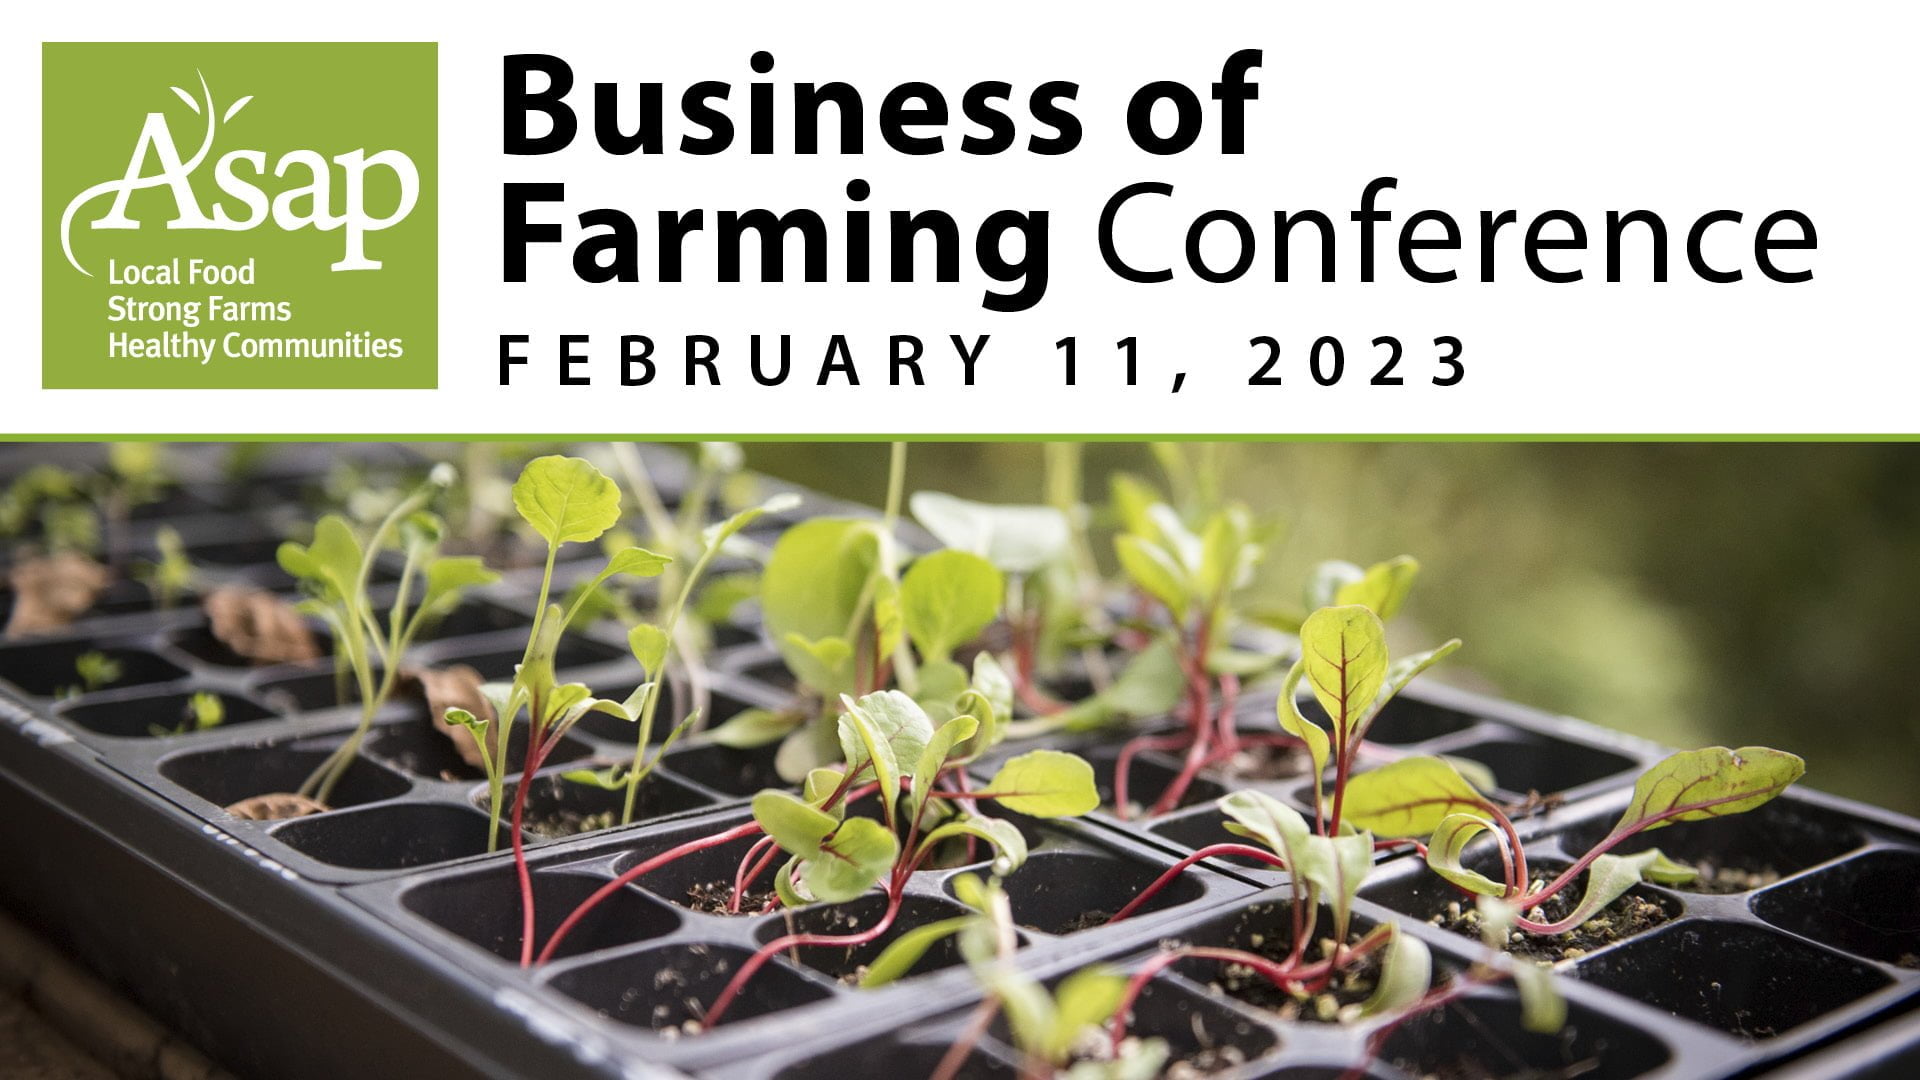 Business of Farming Conference, Feb. 11, 2023